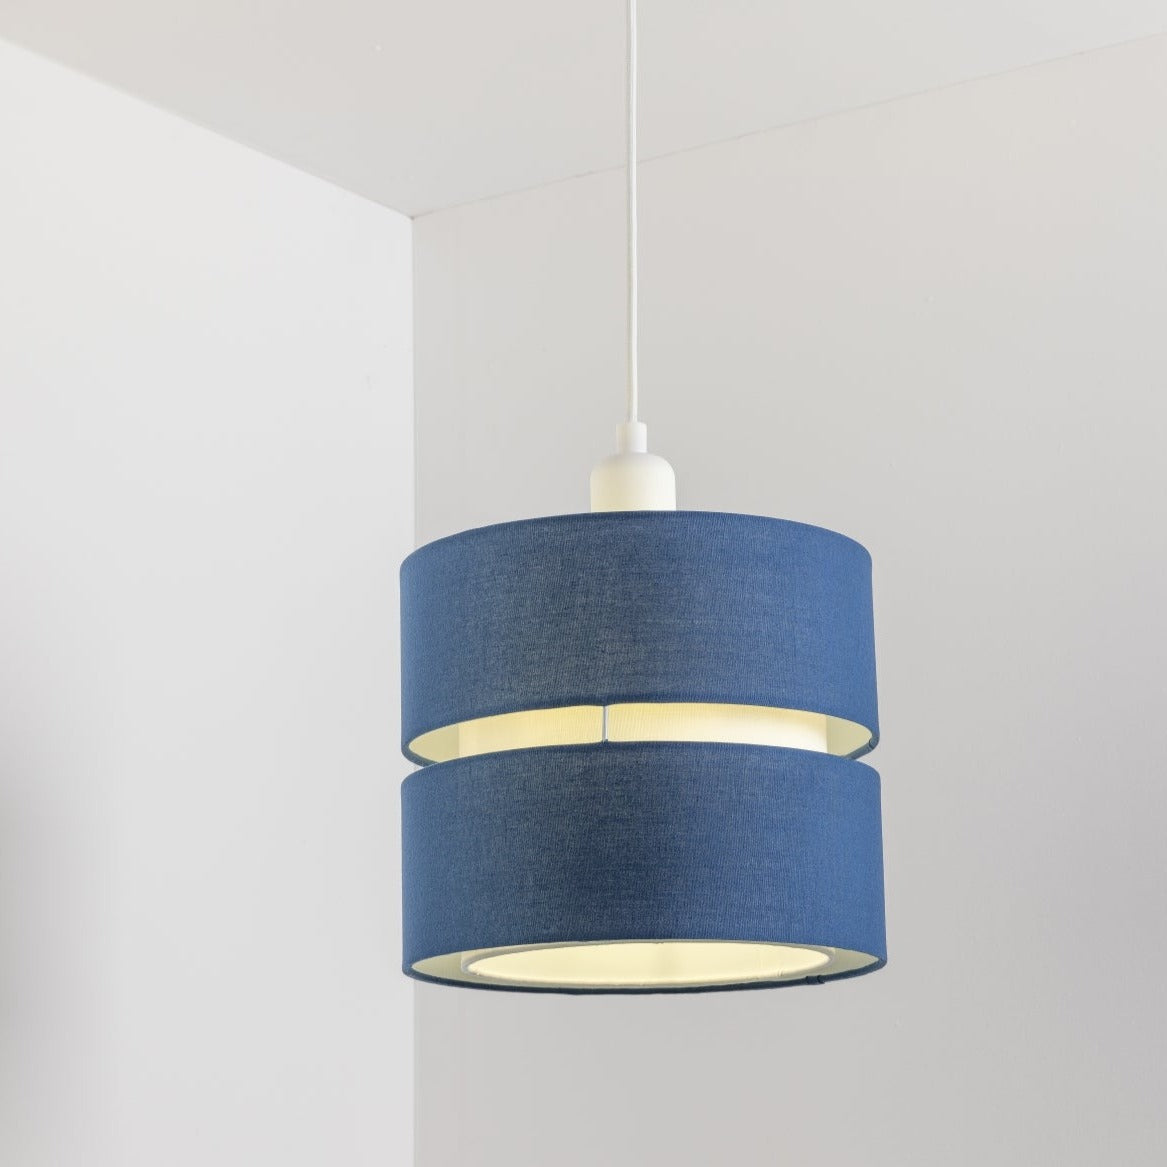 Our Gayle easy fit two tiered luxury fabric double layered shade is contemporary in its appearance and we have designed the shade to suit a range of interiors. Easy to fit simply attached to an existing pendant flitting.  It is crafted from high quality fabric material in two layers and complimented with a white inner which looks beautiful when light shines through. The shade has been made to fit both a ceiling light or lamp base.